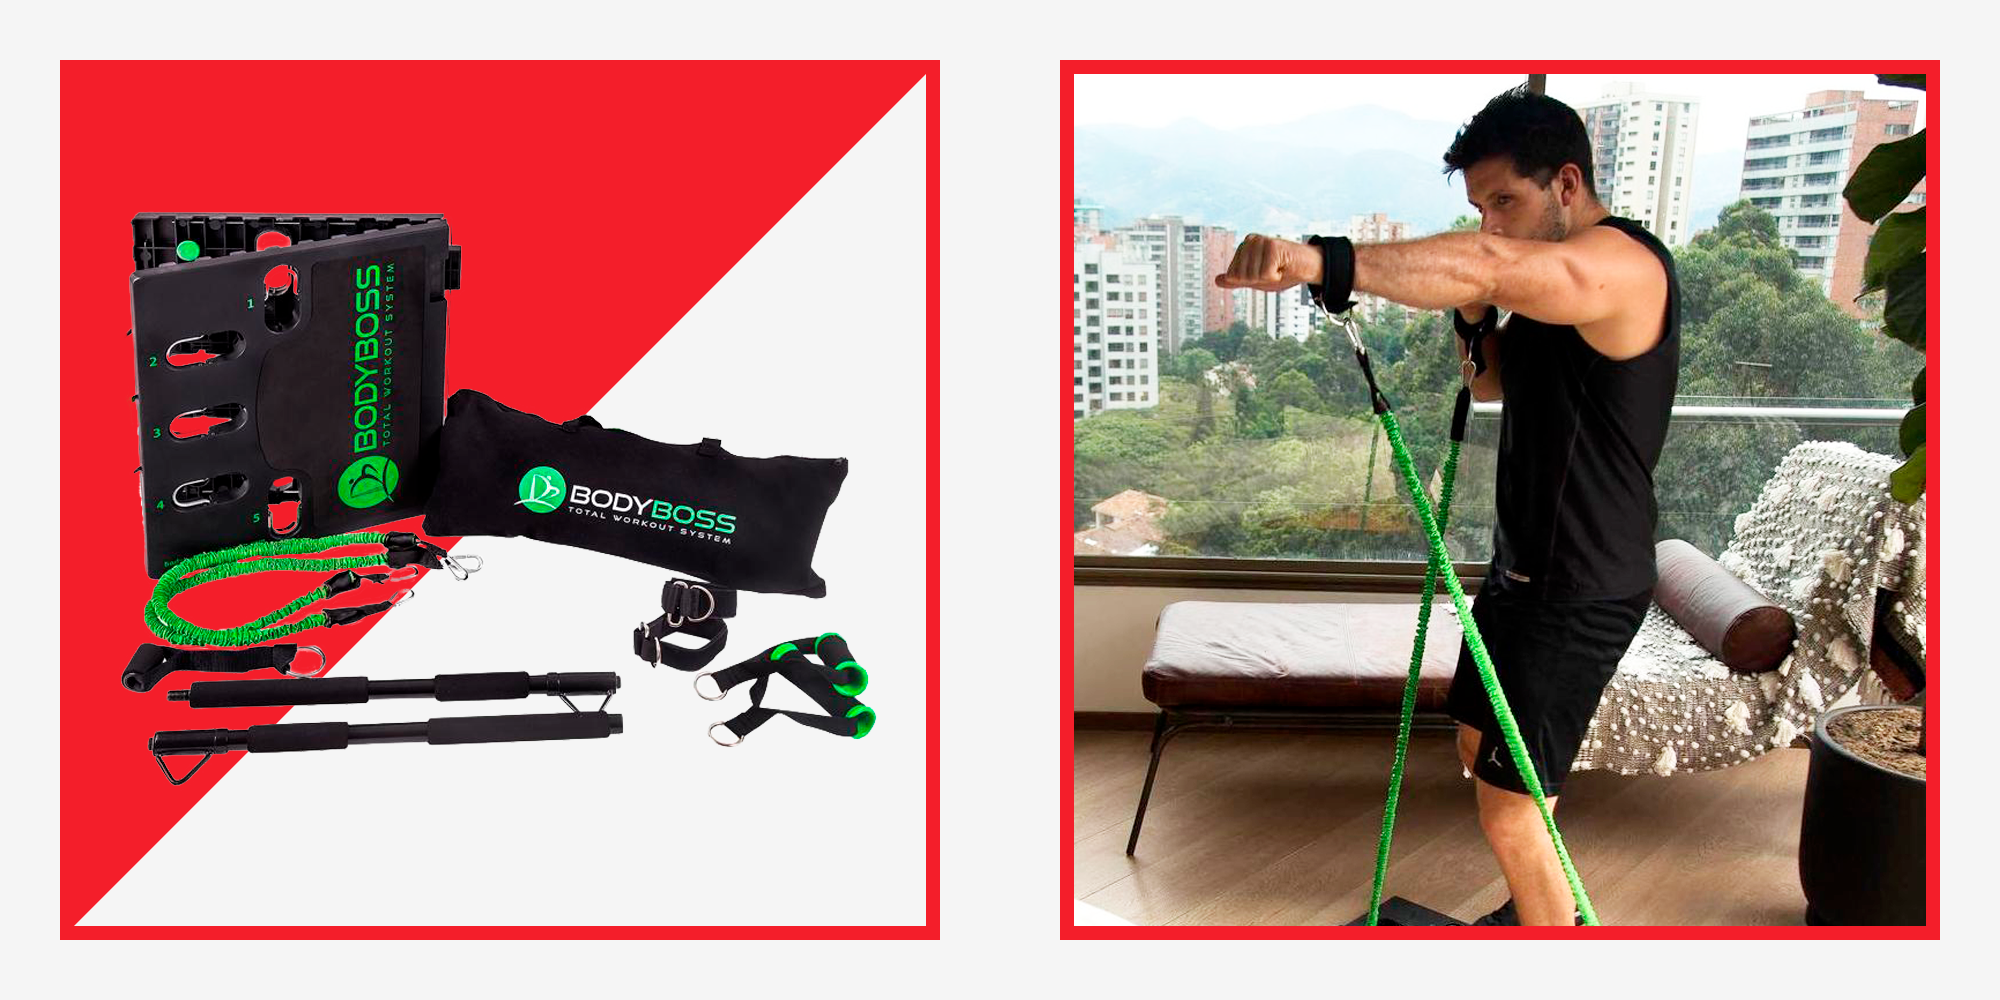 The BodyBoss Portable Gym 2.0 System Is On Sale Today